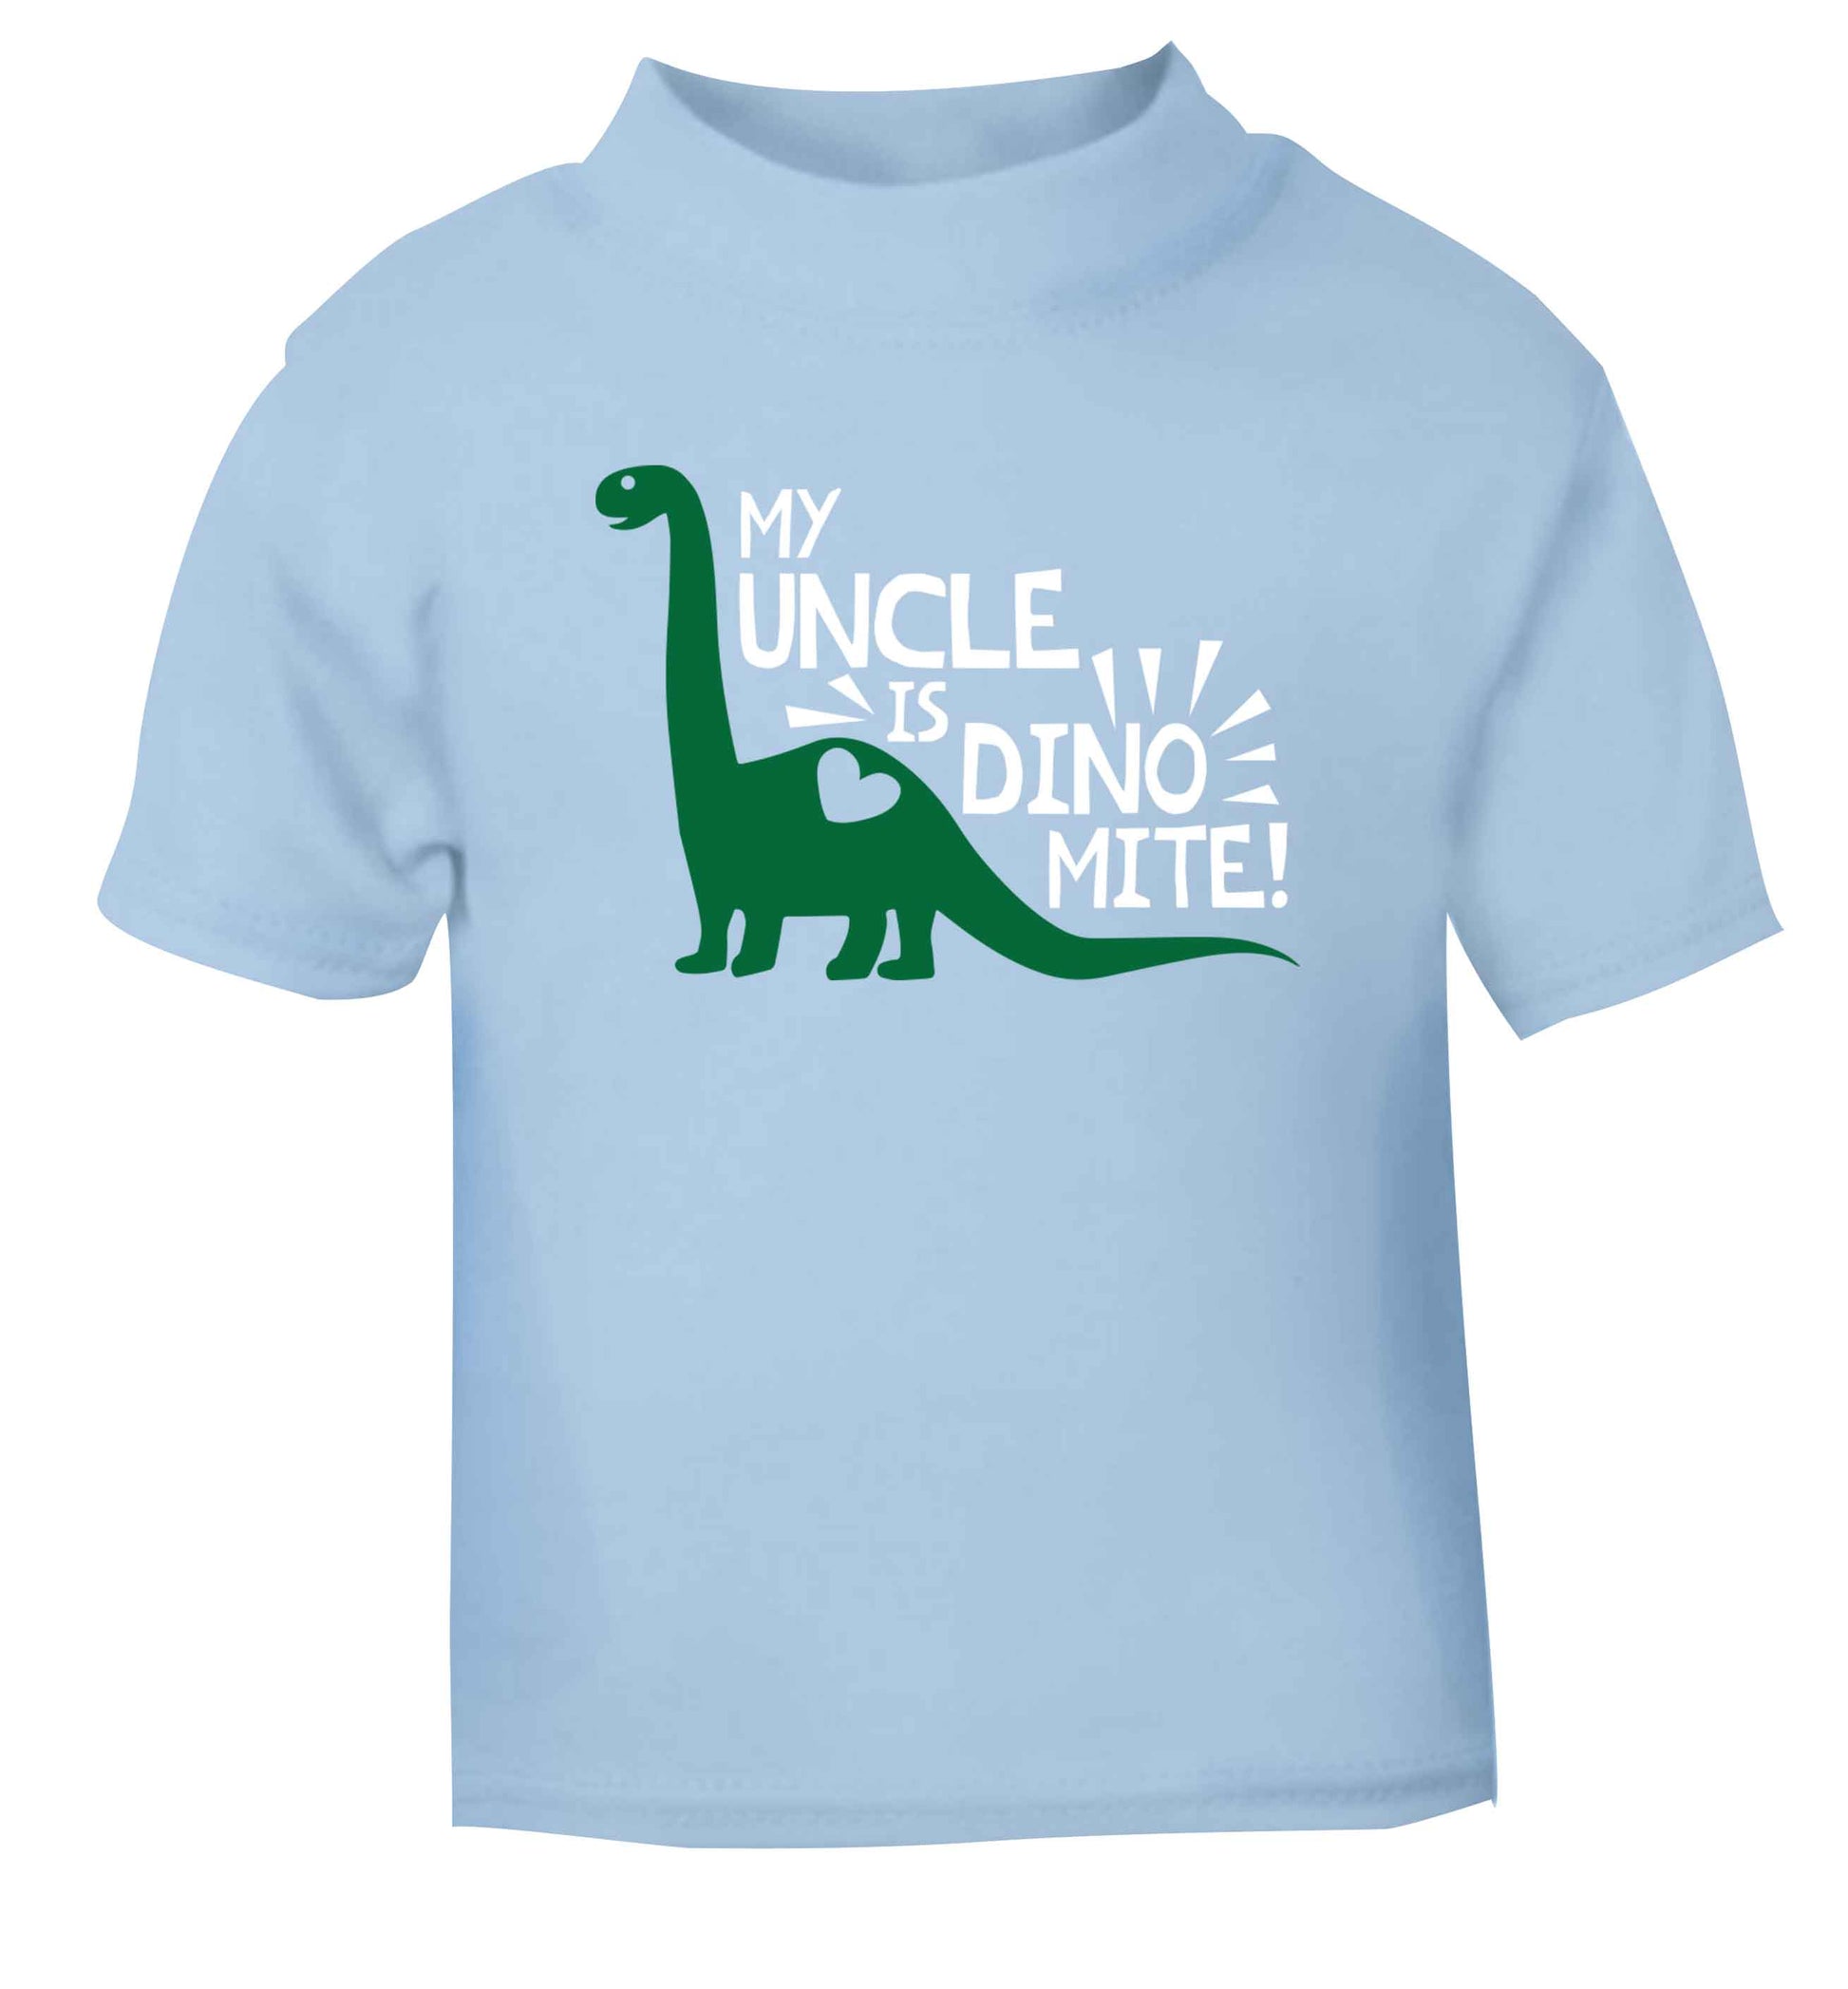 My uncle is dinomite! light blue Baby Toddler Tshirt 2 Years